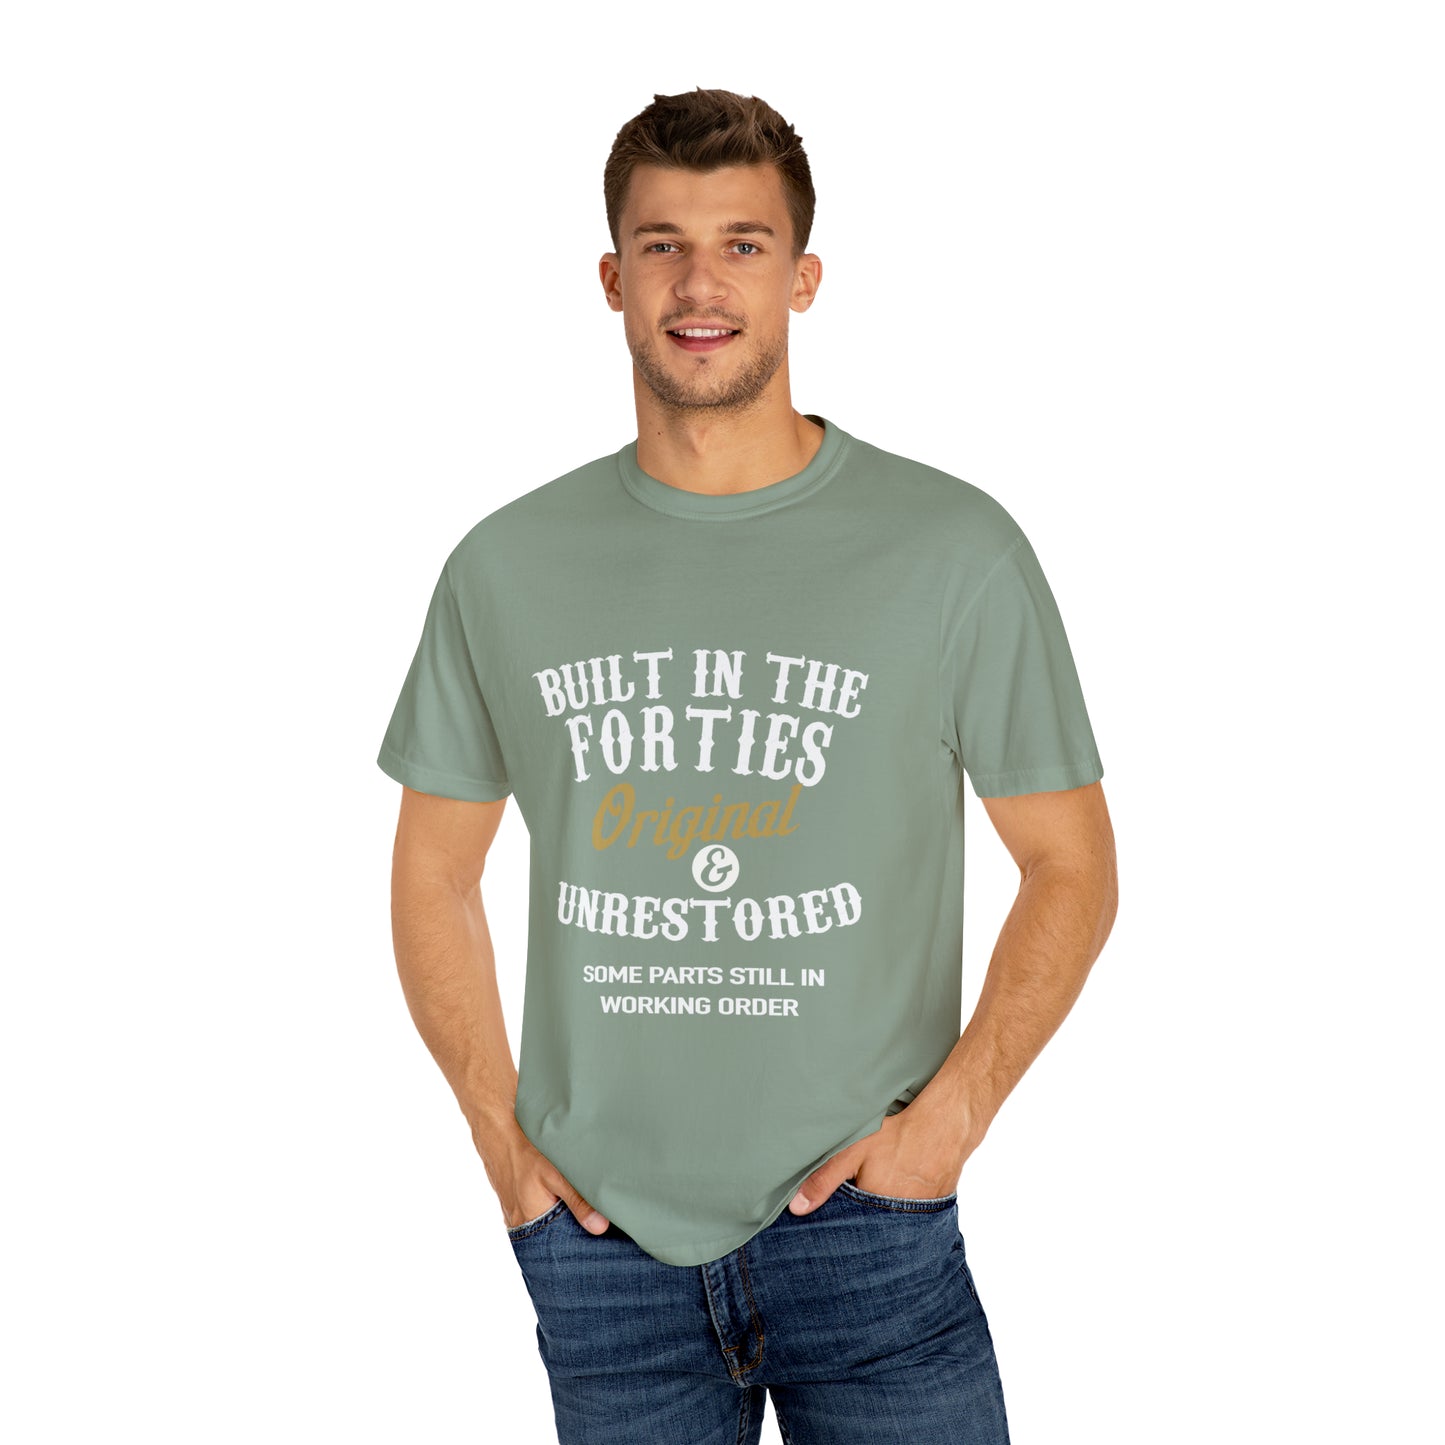 Built In The Forties Original Unrestored Some Parts Still in Working Order T-shirt